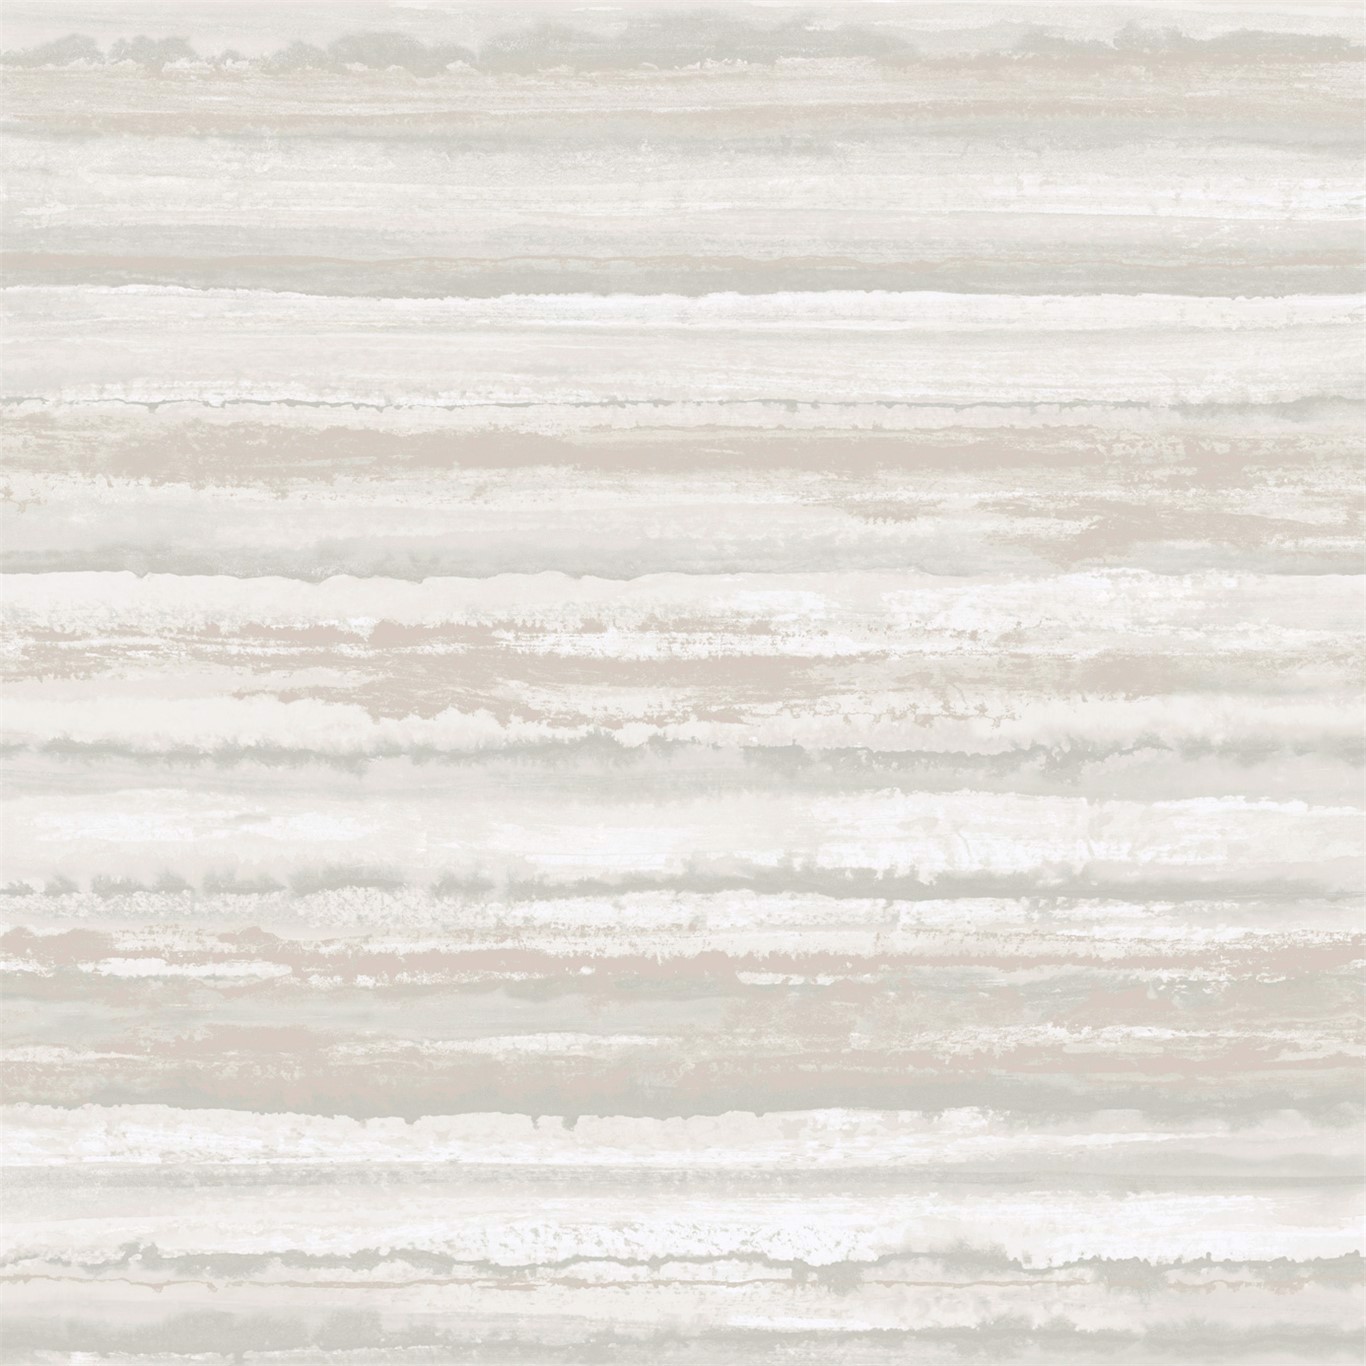 Anthology Therassia Travertine Wallpaper by HAR